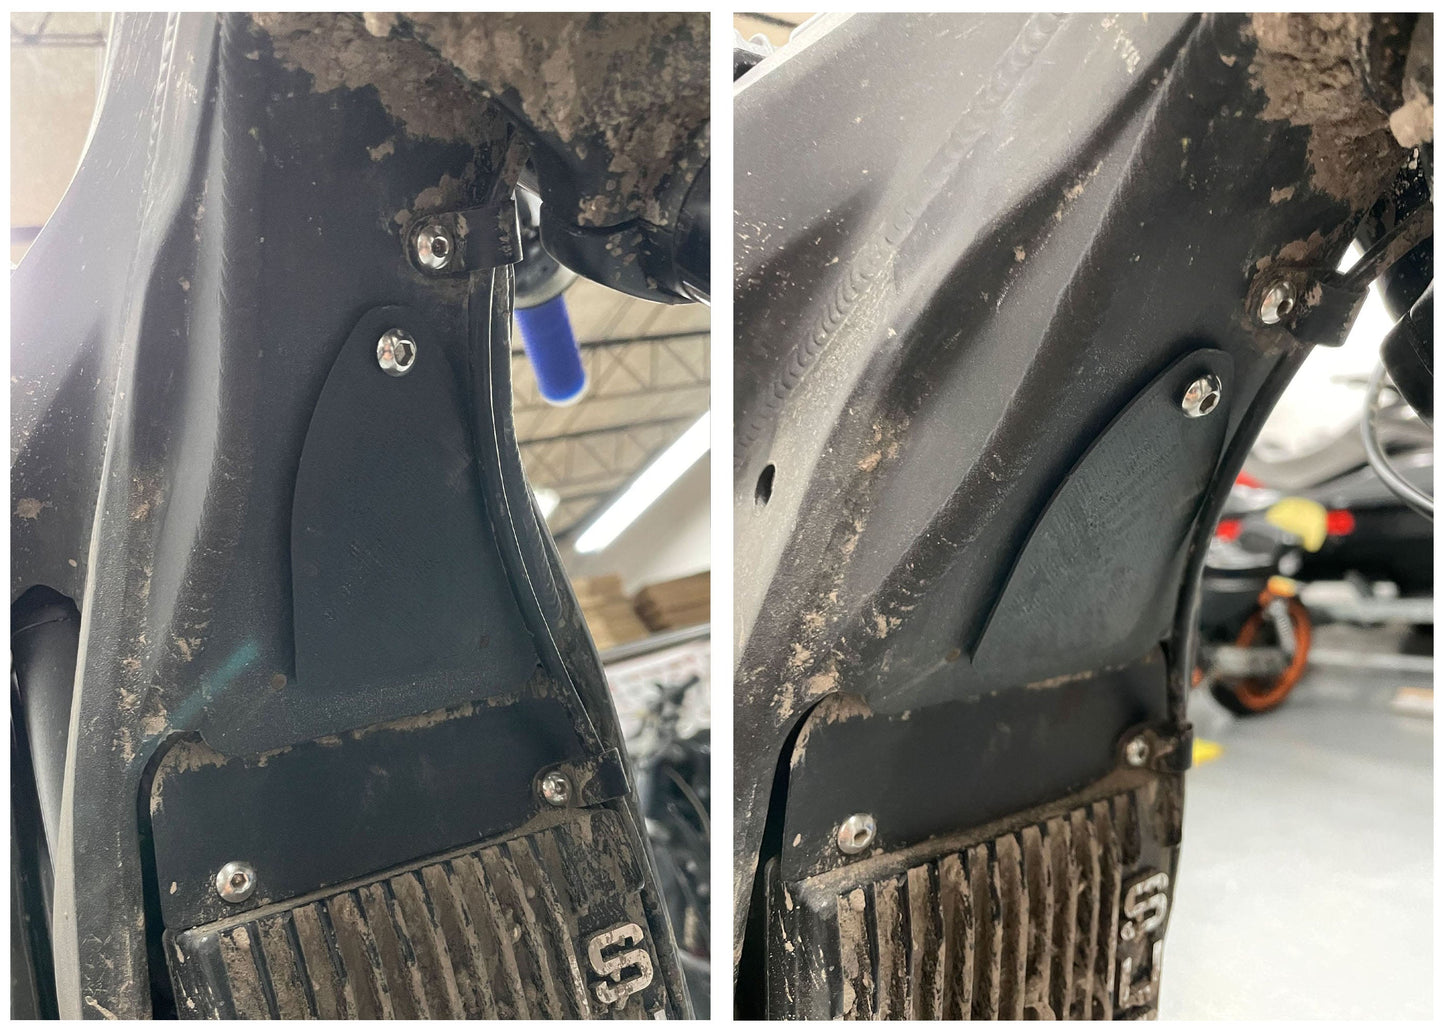 GritShift Horn Cover/Delete Plate (Sur Ron & Segway)